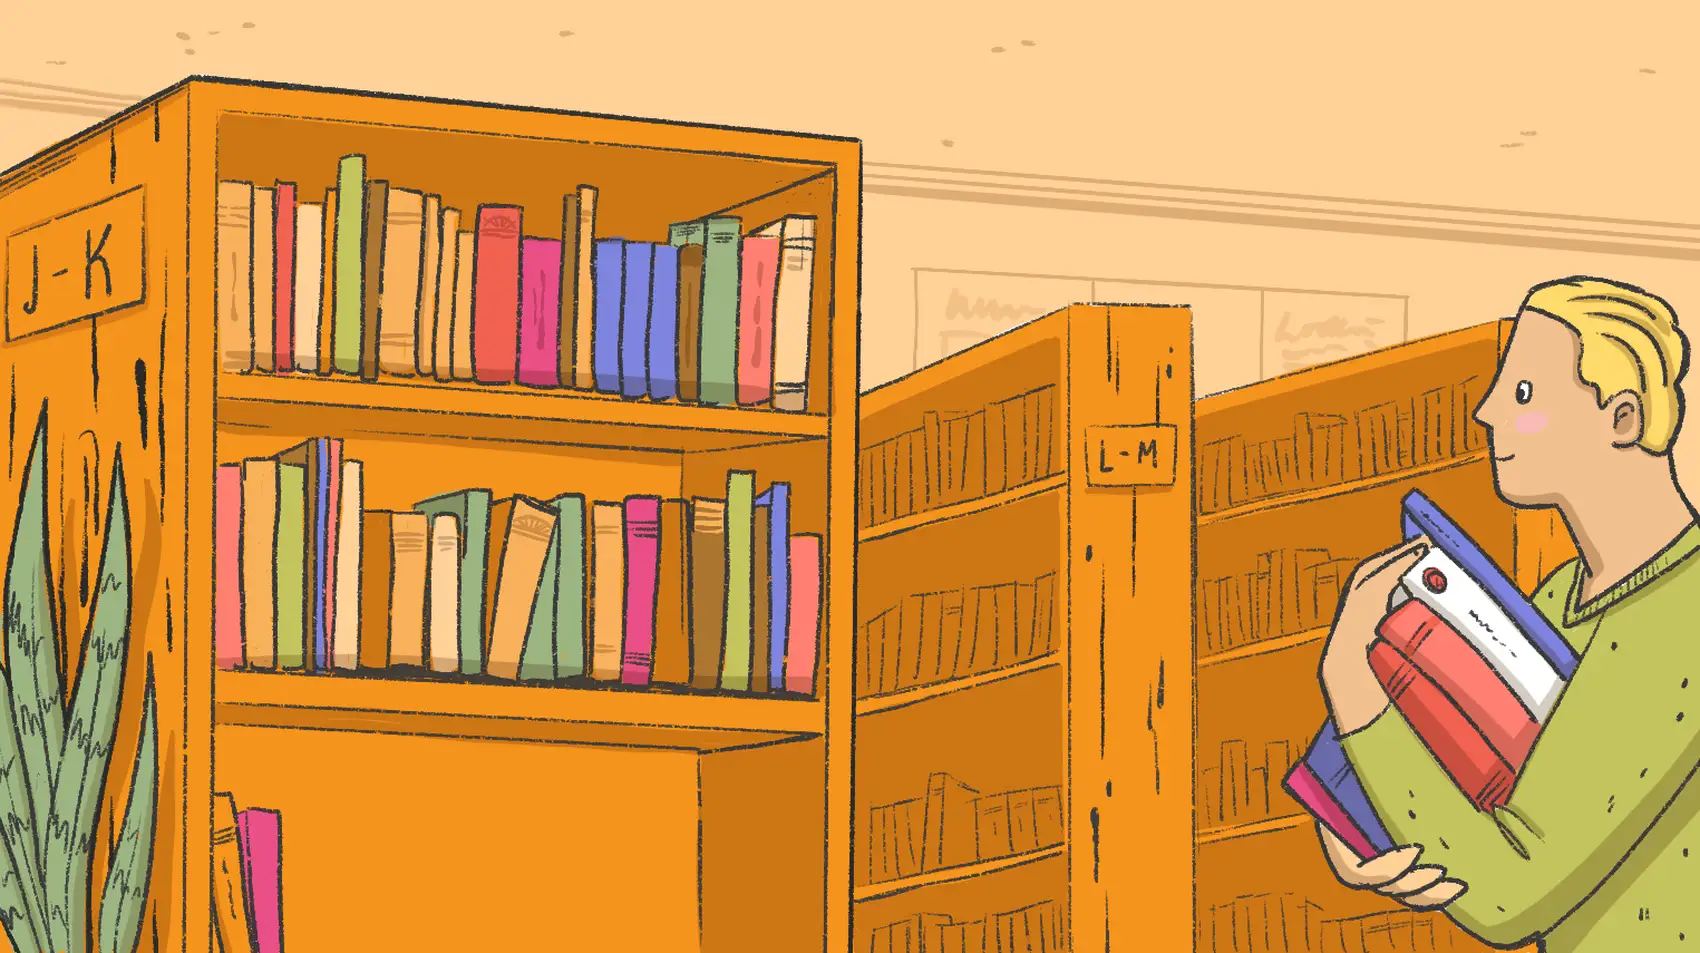 A book shelf is shown with the first two upper shelf filled with books, with its third shelf containing only two books. A person is seen approaching the shelf carrying several books. Two additional book shelves are seen on the right of the first bookshelf, with all their shelves filled with books.